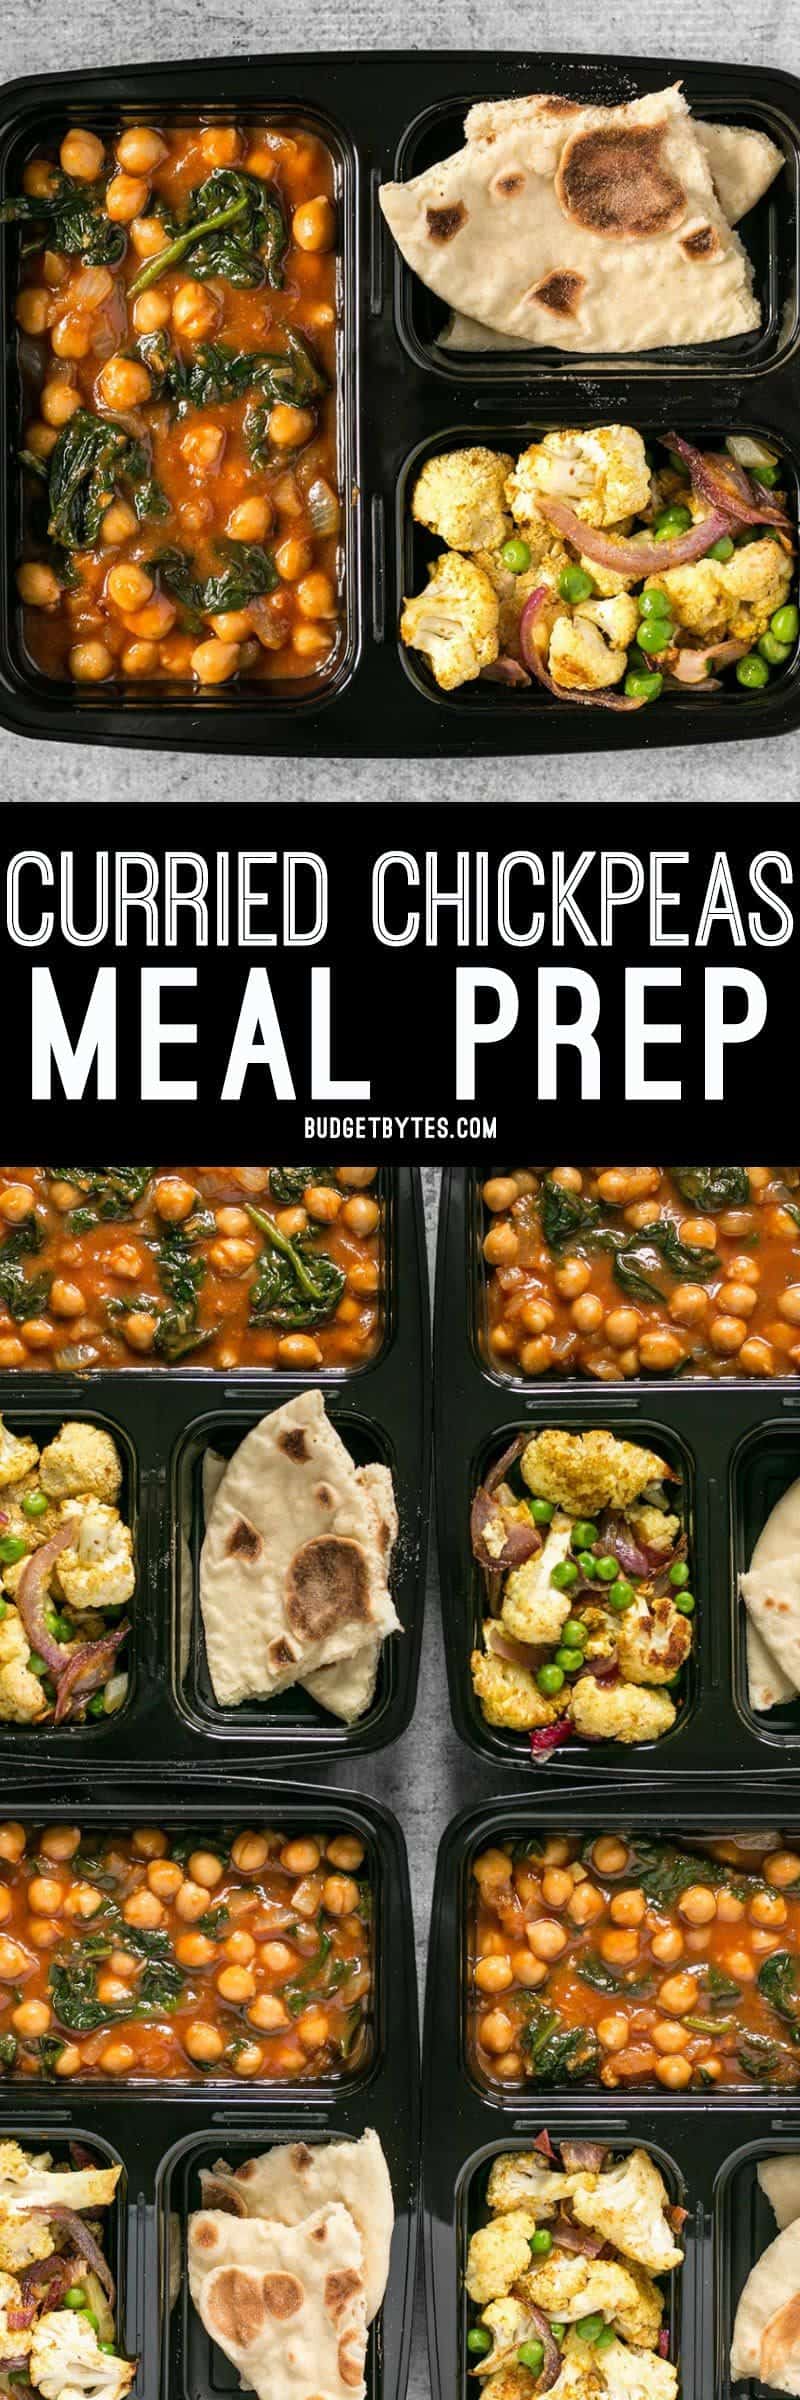 Curried Chickpeas Meal Prep - Budget Bytes